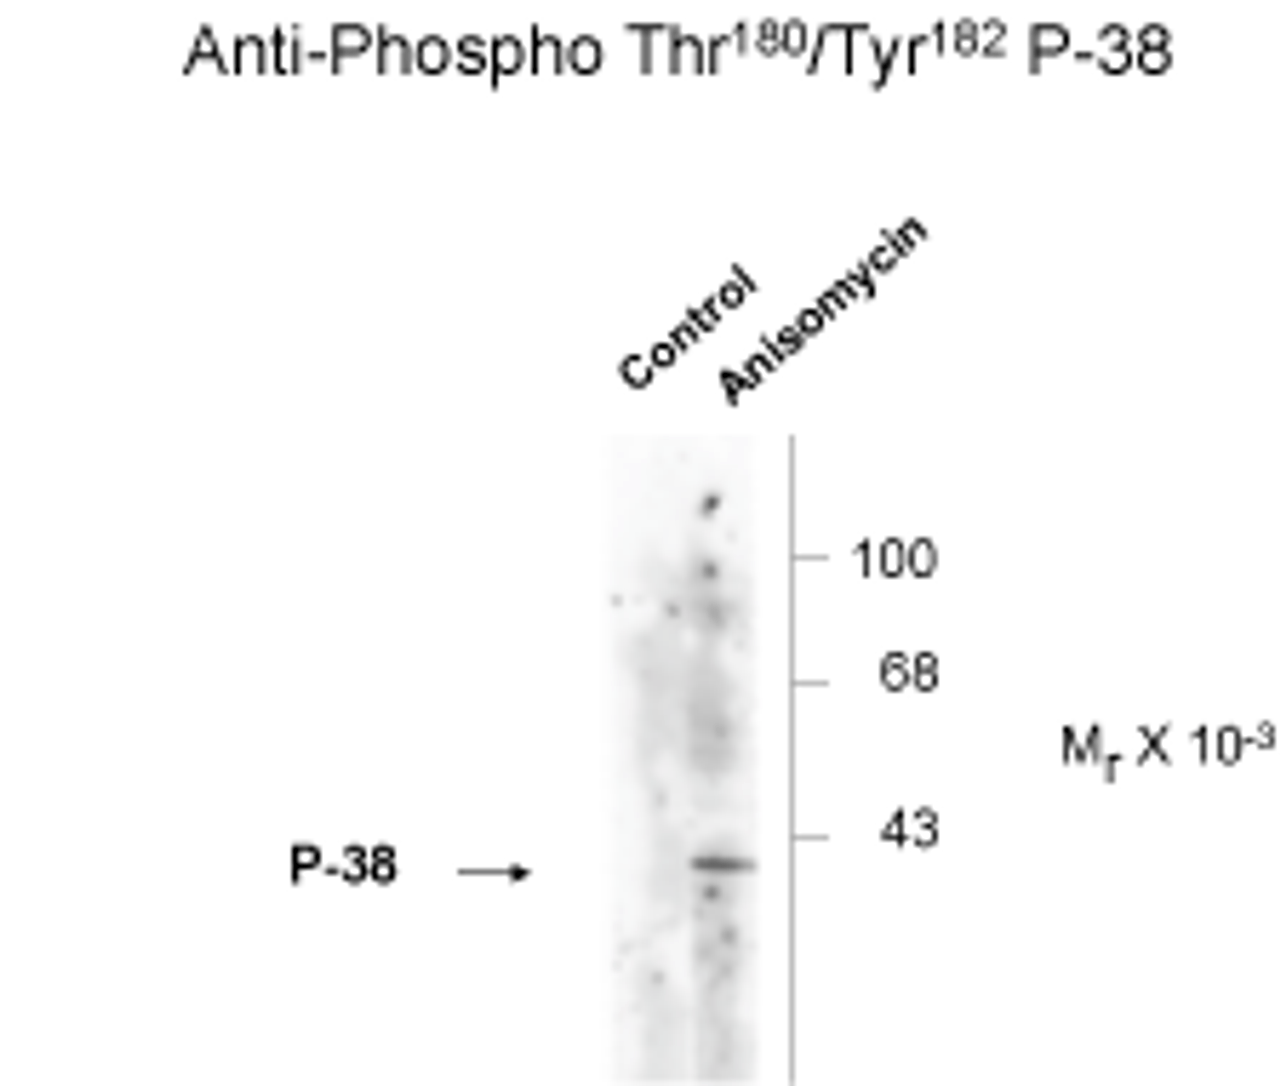 Western blot of Hela cell lysates that had been treated with +/- UV (30 min.) showing phosphospecific immunolabeling of the ~39k p38 MAPK protein phosphorylated at Thr180 and Tyr182.